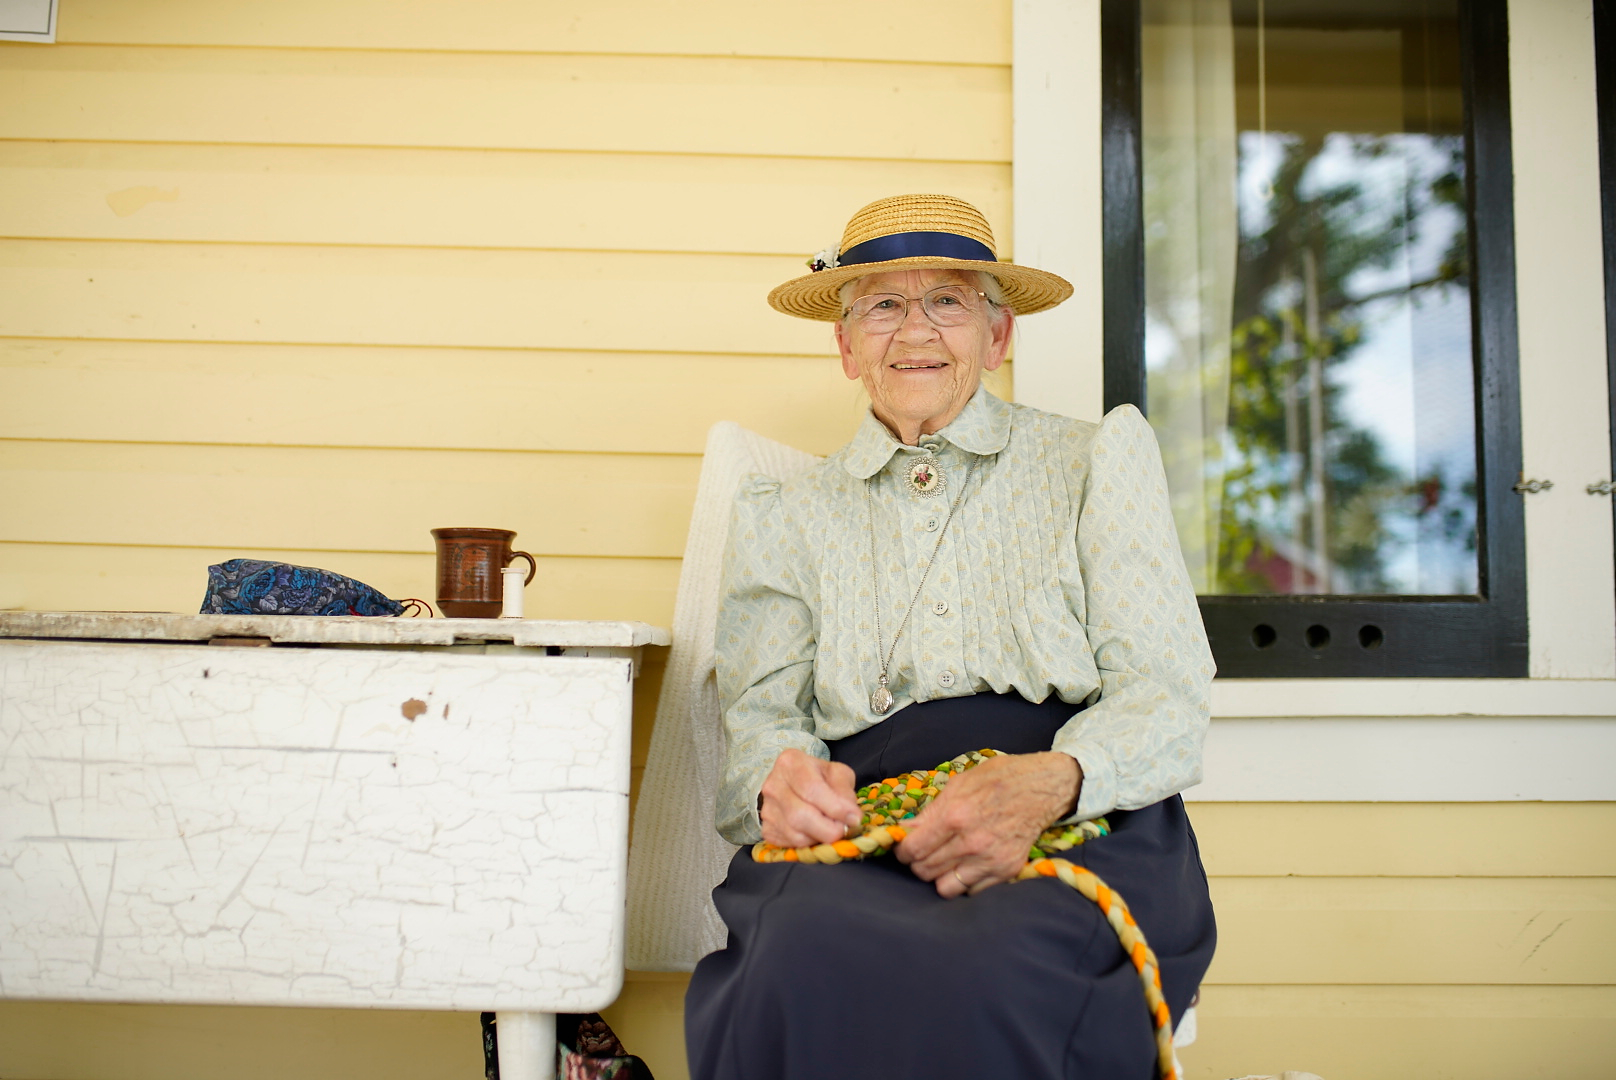 Heritage Park Volunteer - an older woman sitting on the porch of the ranch house